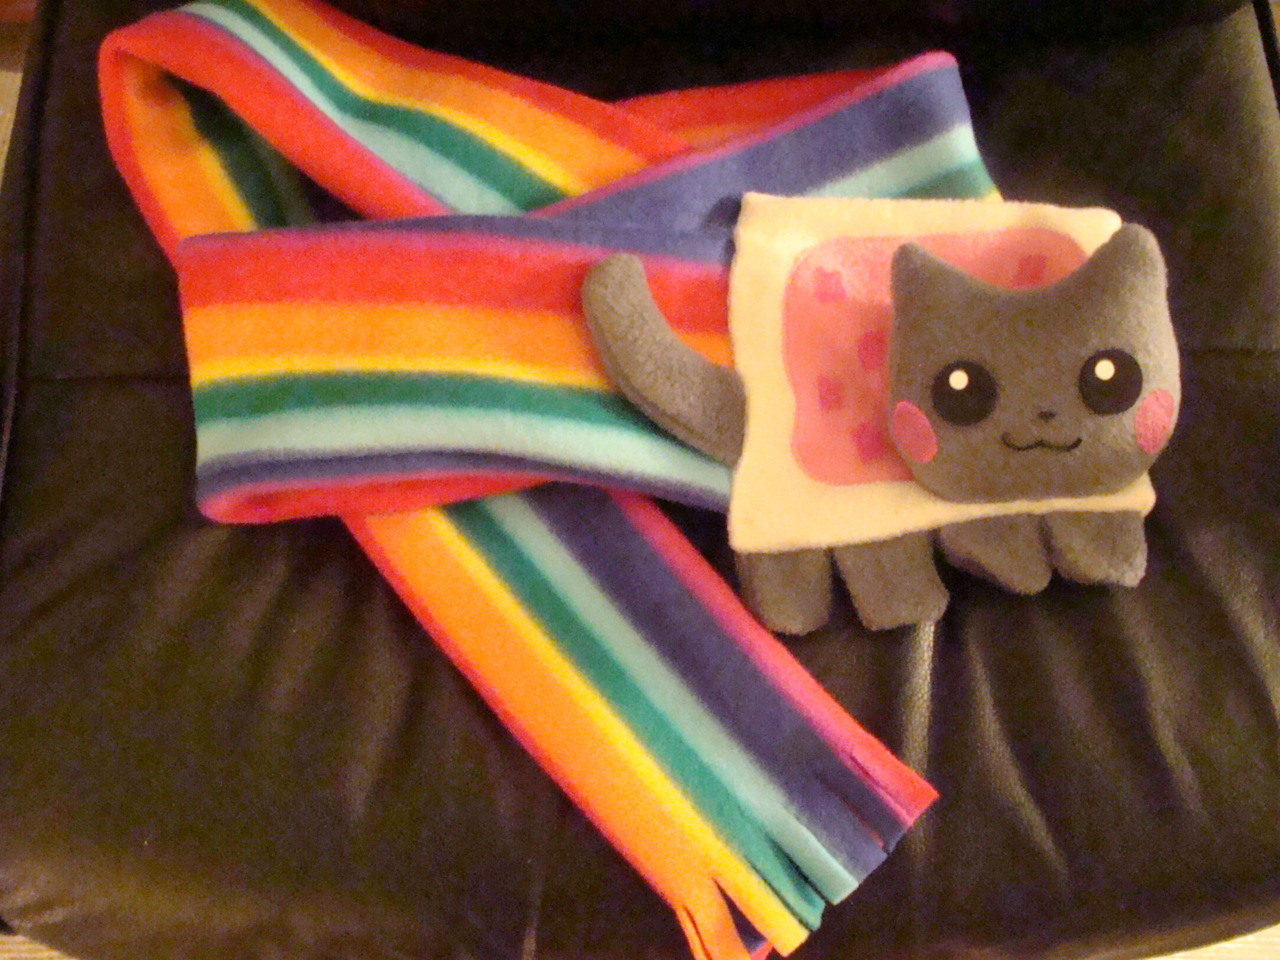 Nyan Cat scarf with and without flash. Cute right? Nathen had bought this Nyan Cat